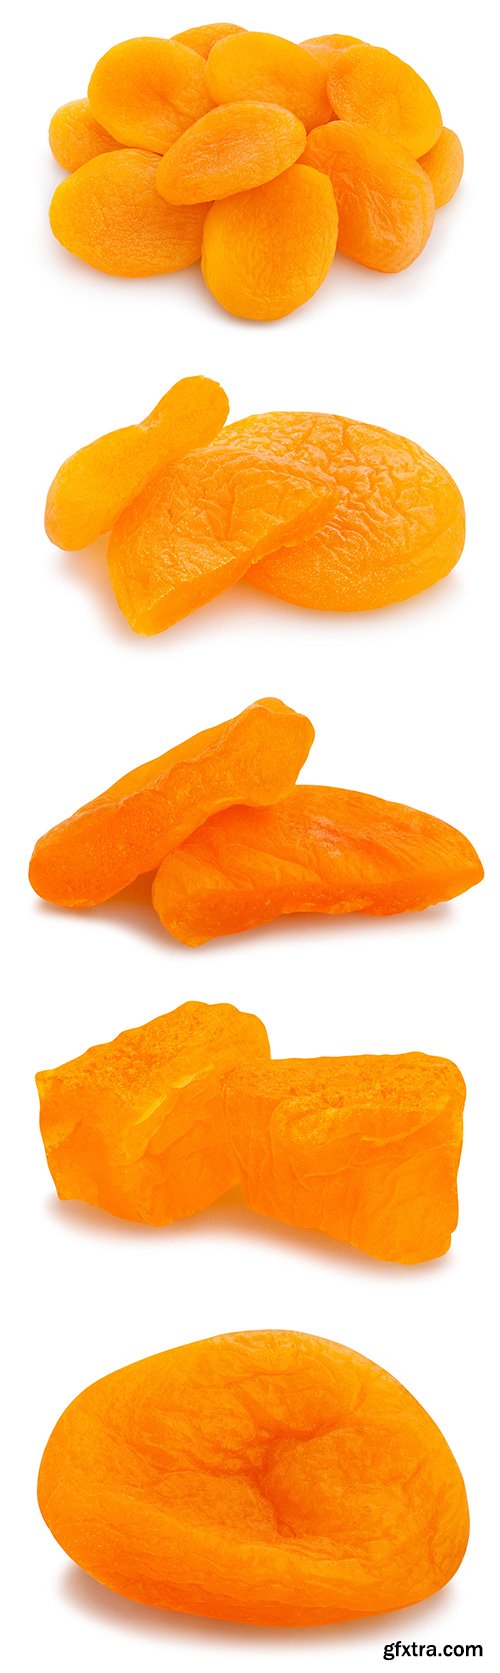 Dried Apricots Isolated - 7xJPGs